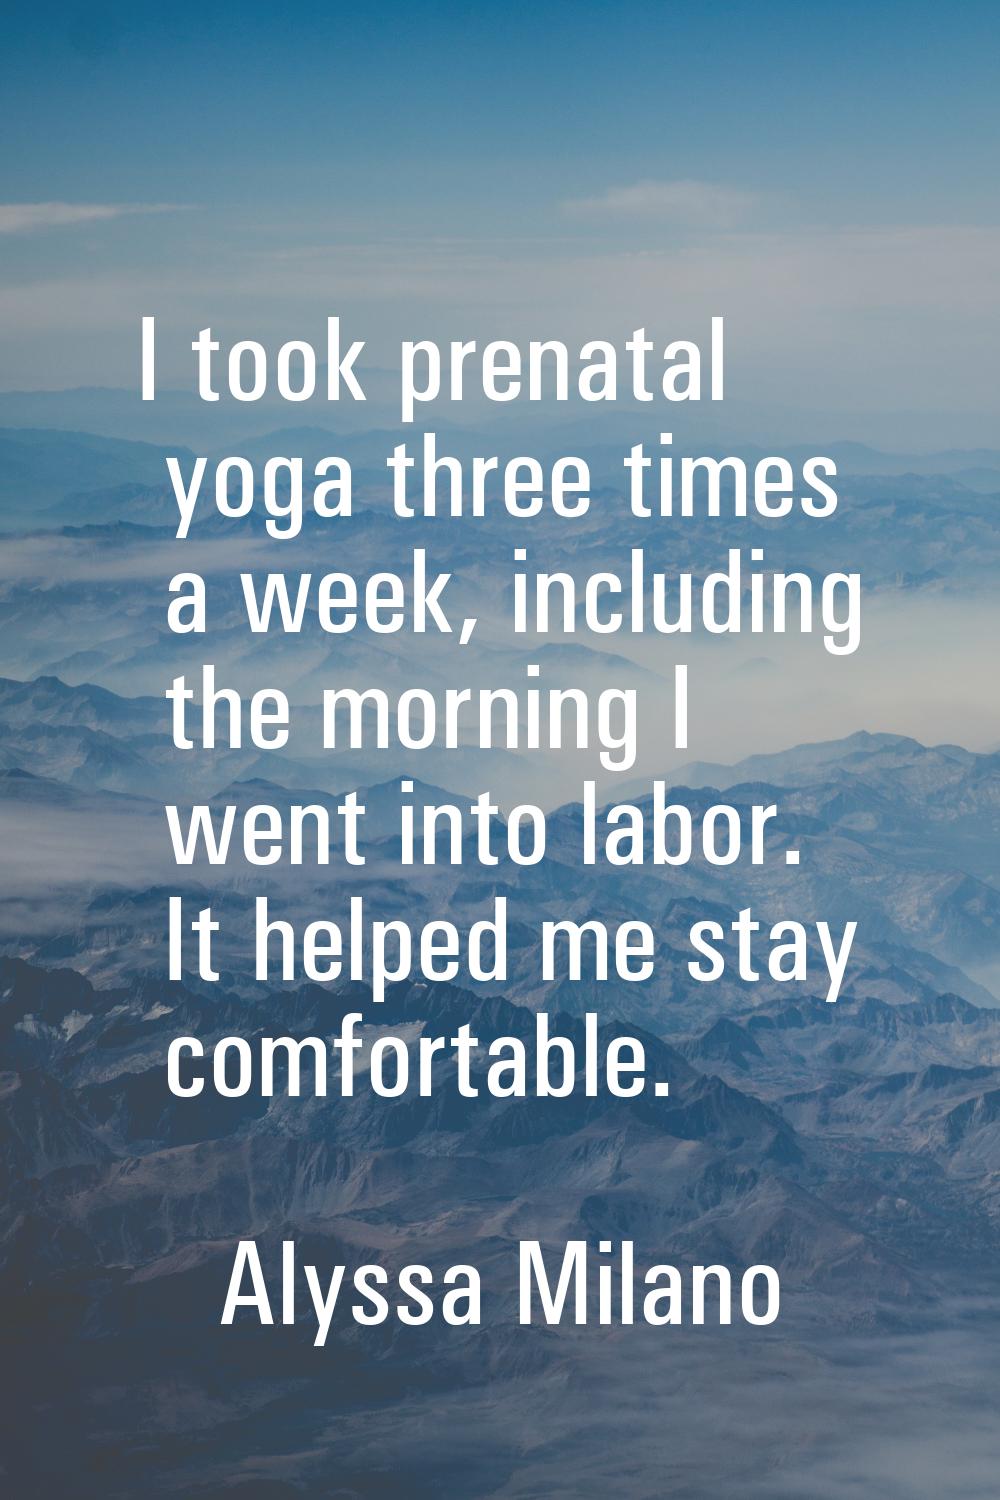 I took prenatal yoga three times a week, including the morning I went into labor. It helped me stay